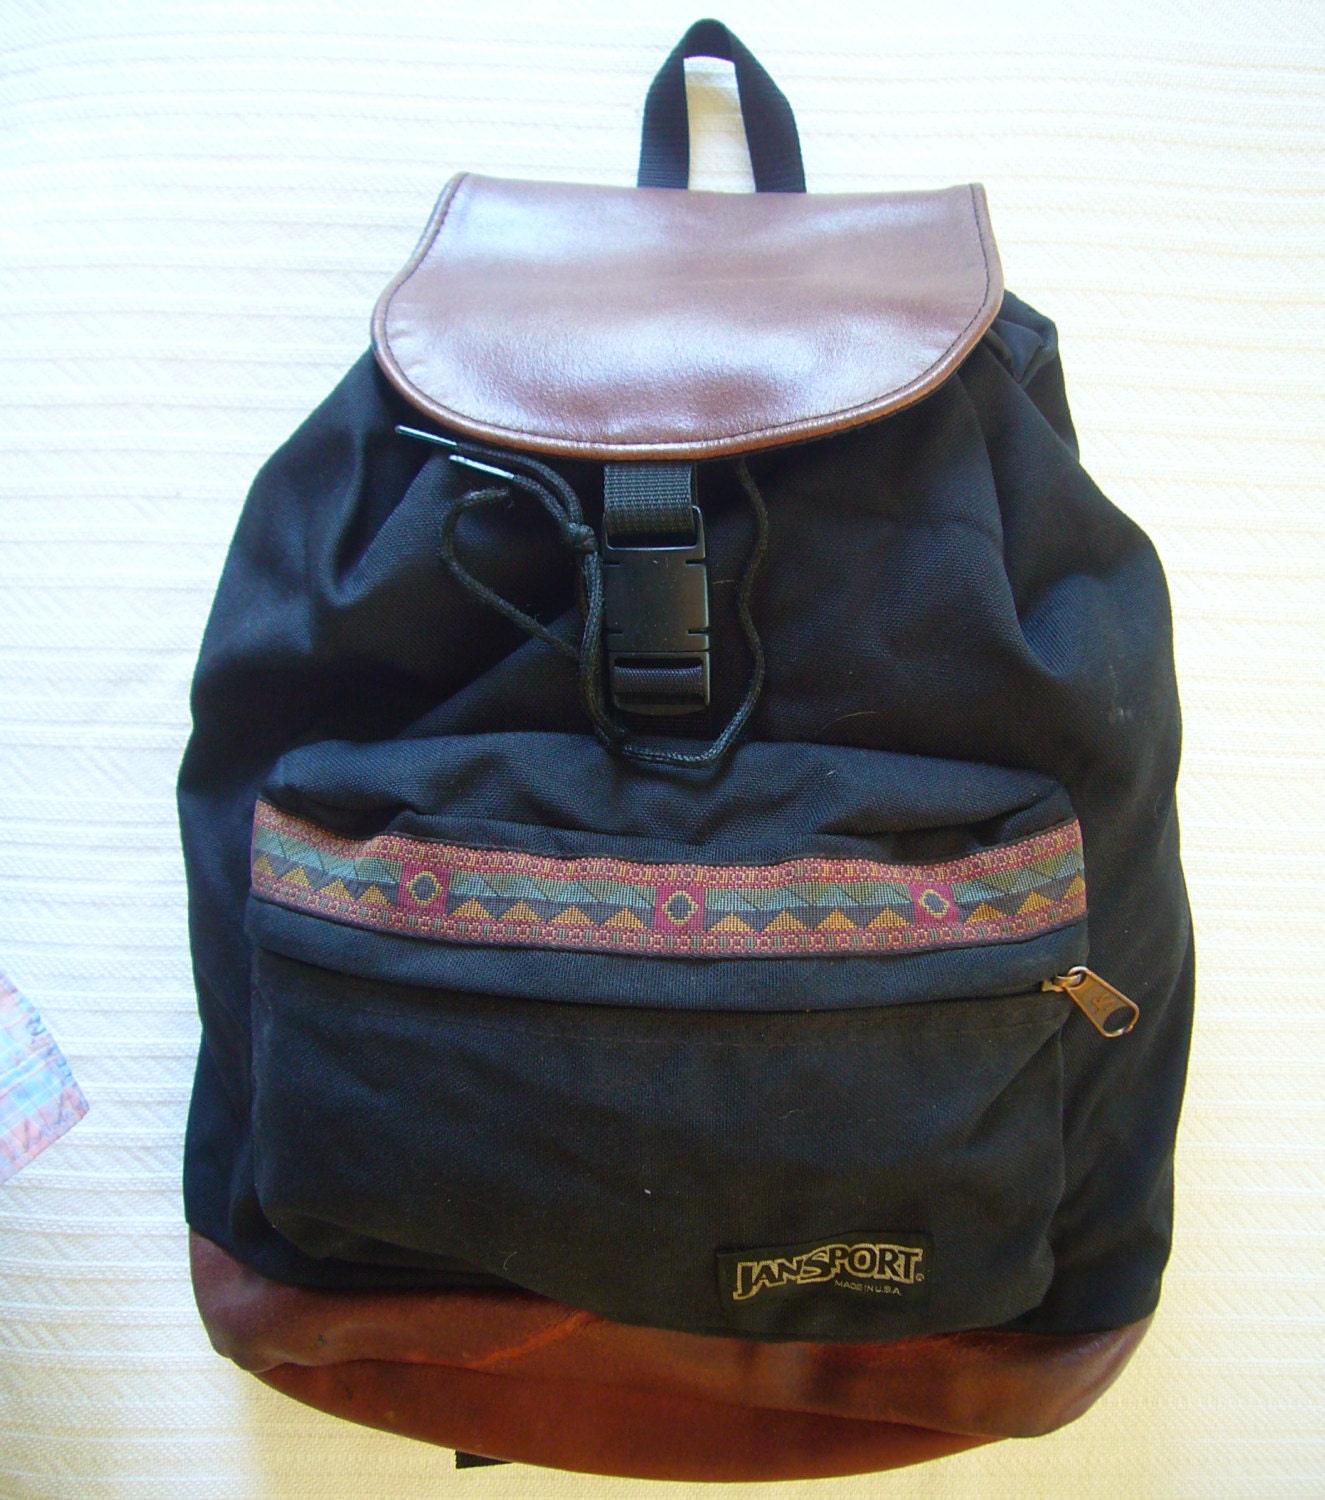 JanSport Vintage Leather Flap Backpack Made in USA by Metropology